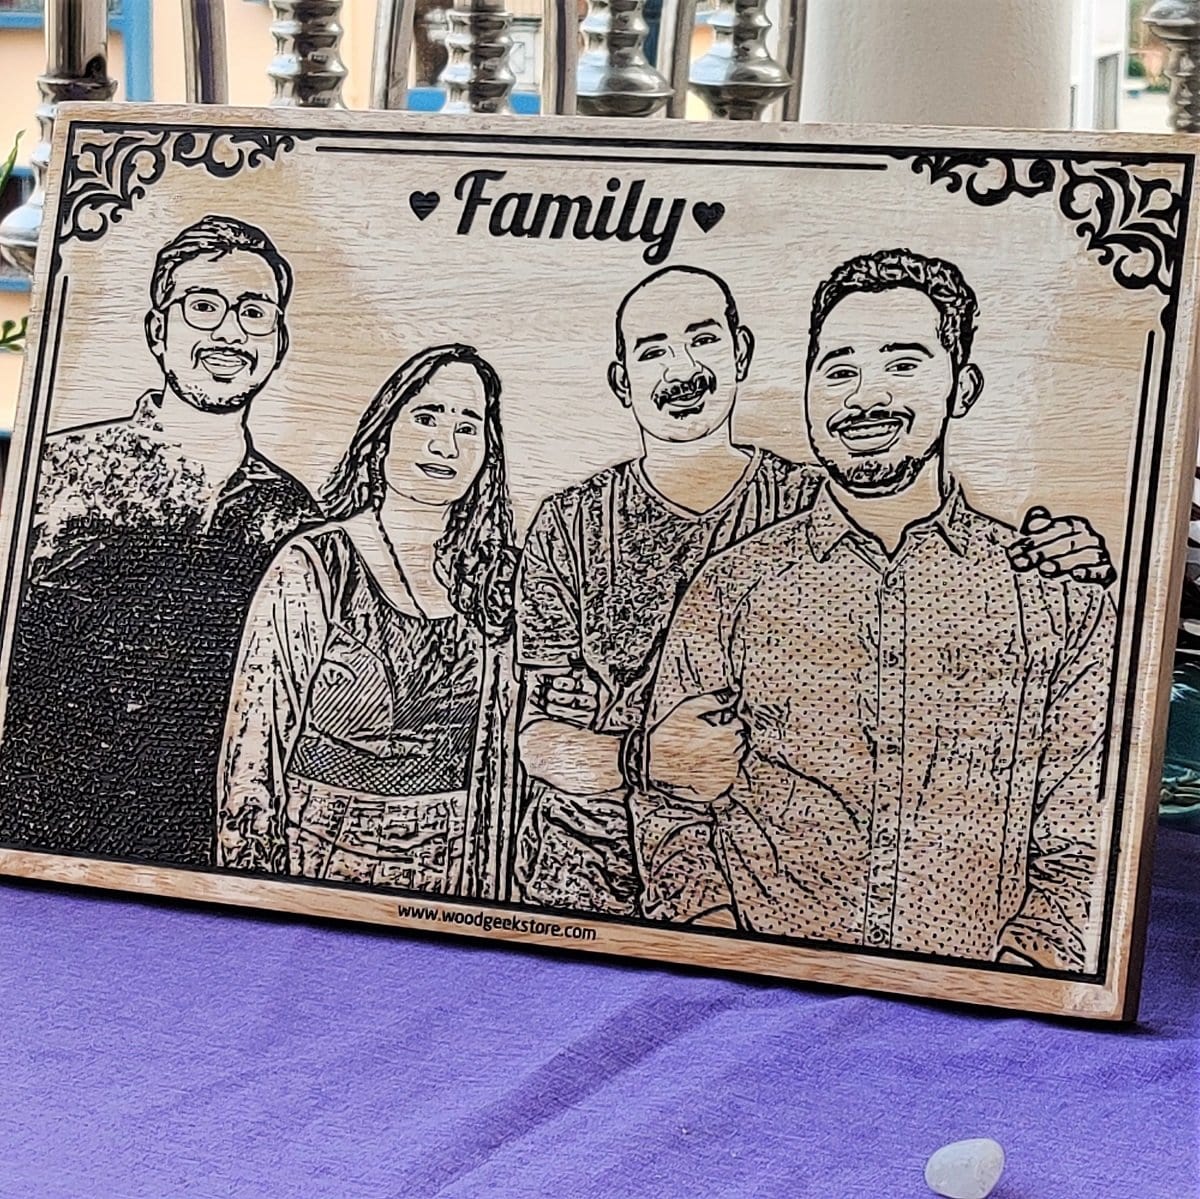 personalized-gift-for-family-engraved-wood-frame-woodgeekstore